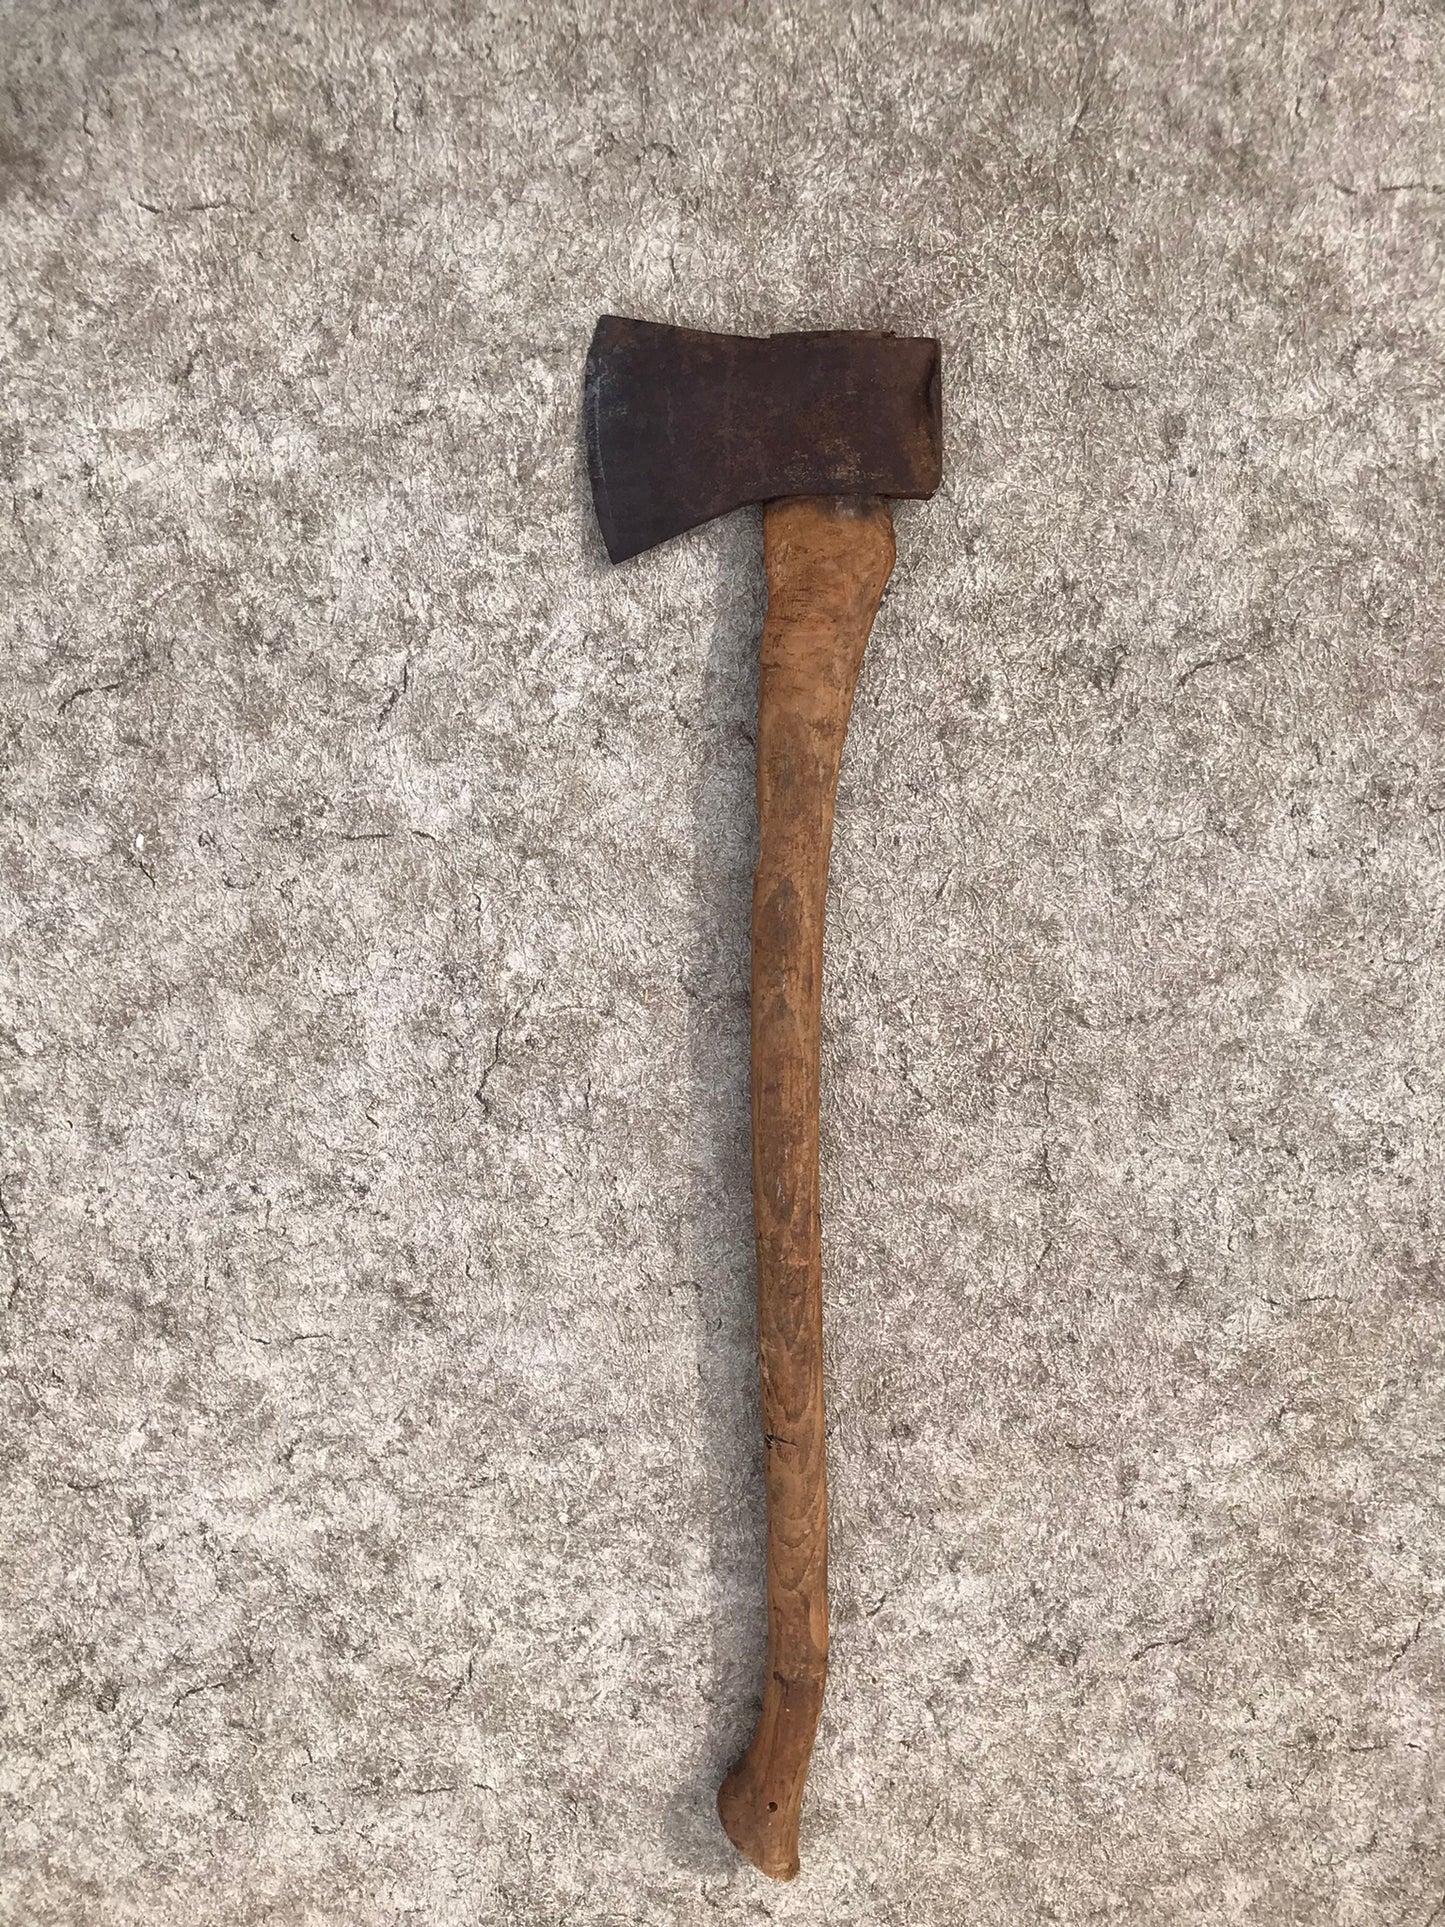 Camping Wood Cutting Long Handle Axe Vintage 3 Feet Tall